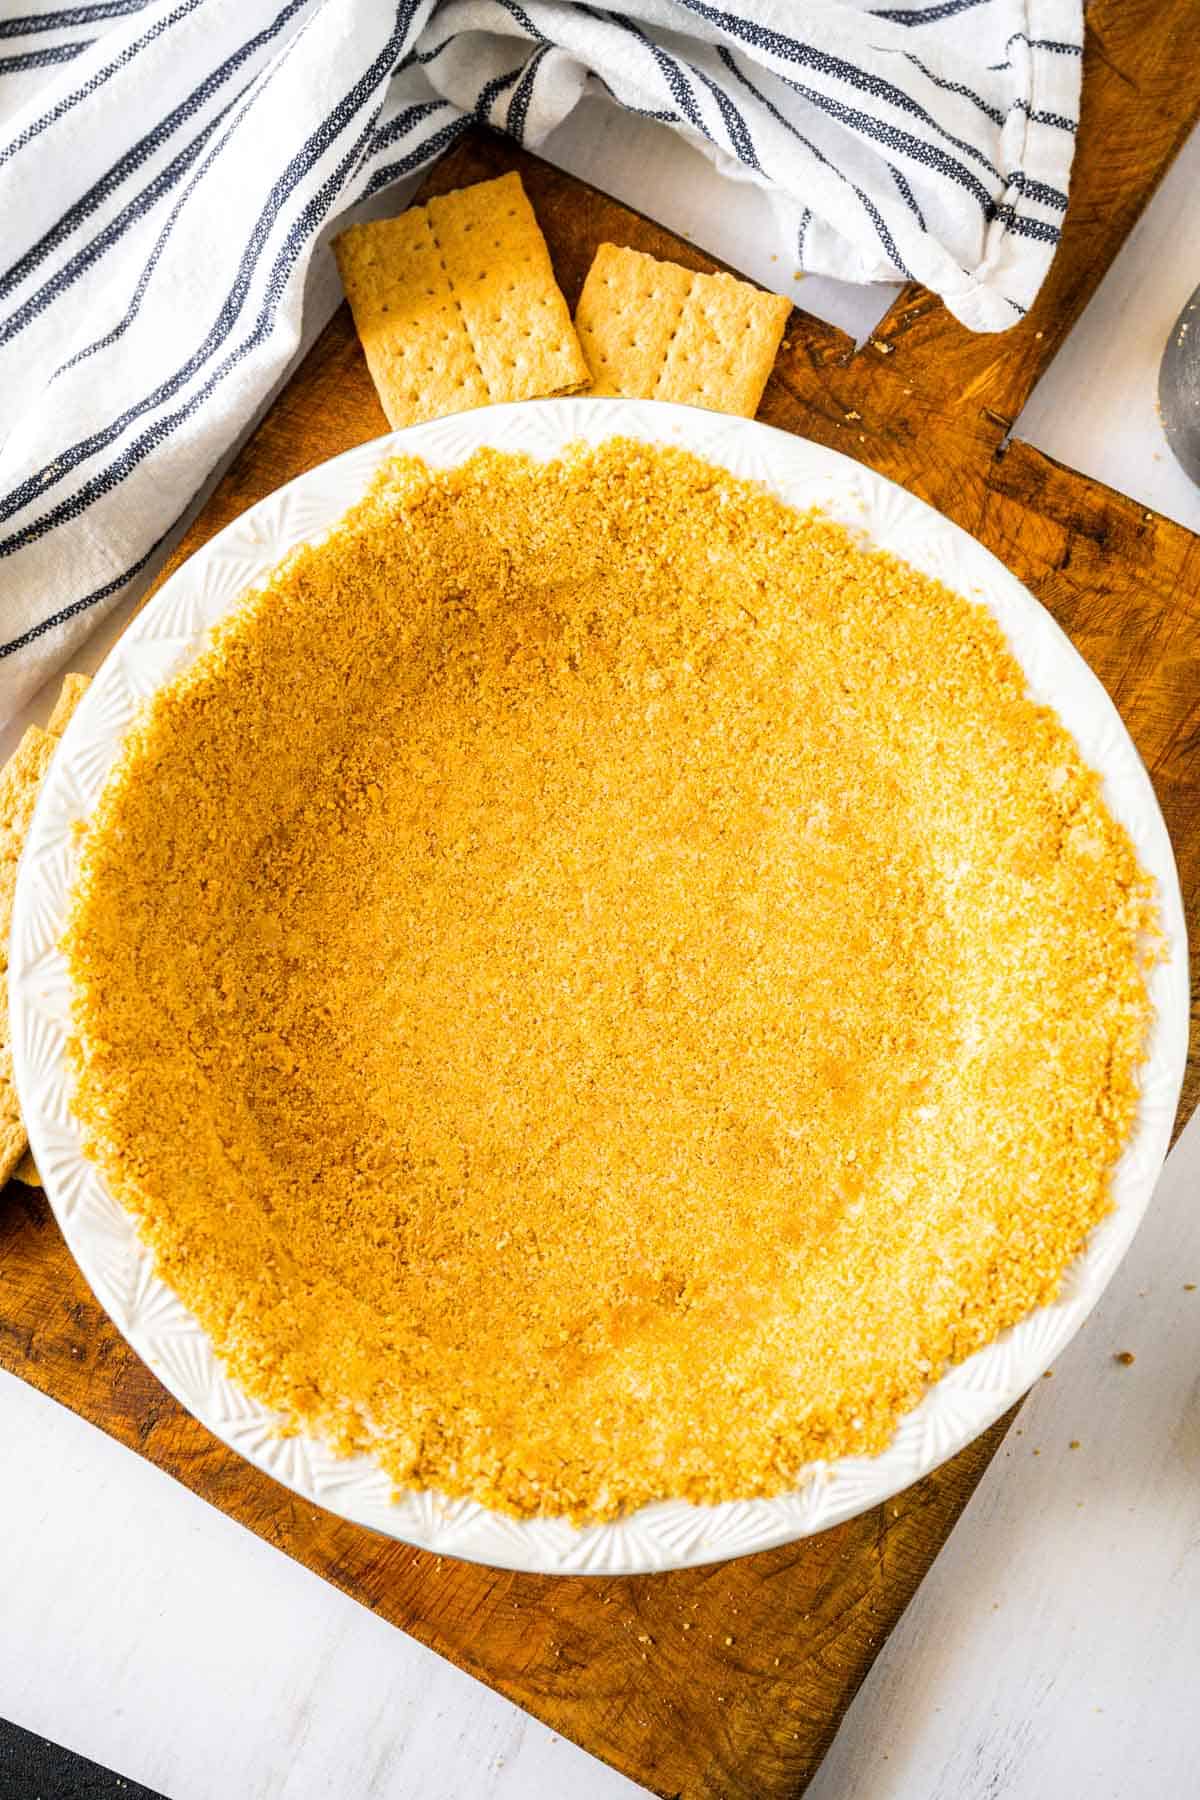 A no bake homemade graham cracker crust in a white pie plate cooling on a wooden board with scattered crumbs, crackers and a tea towel.